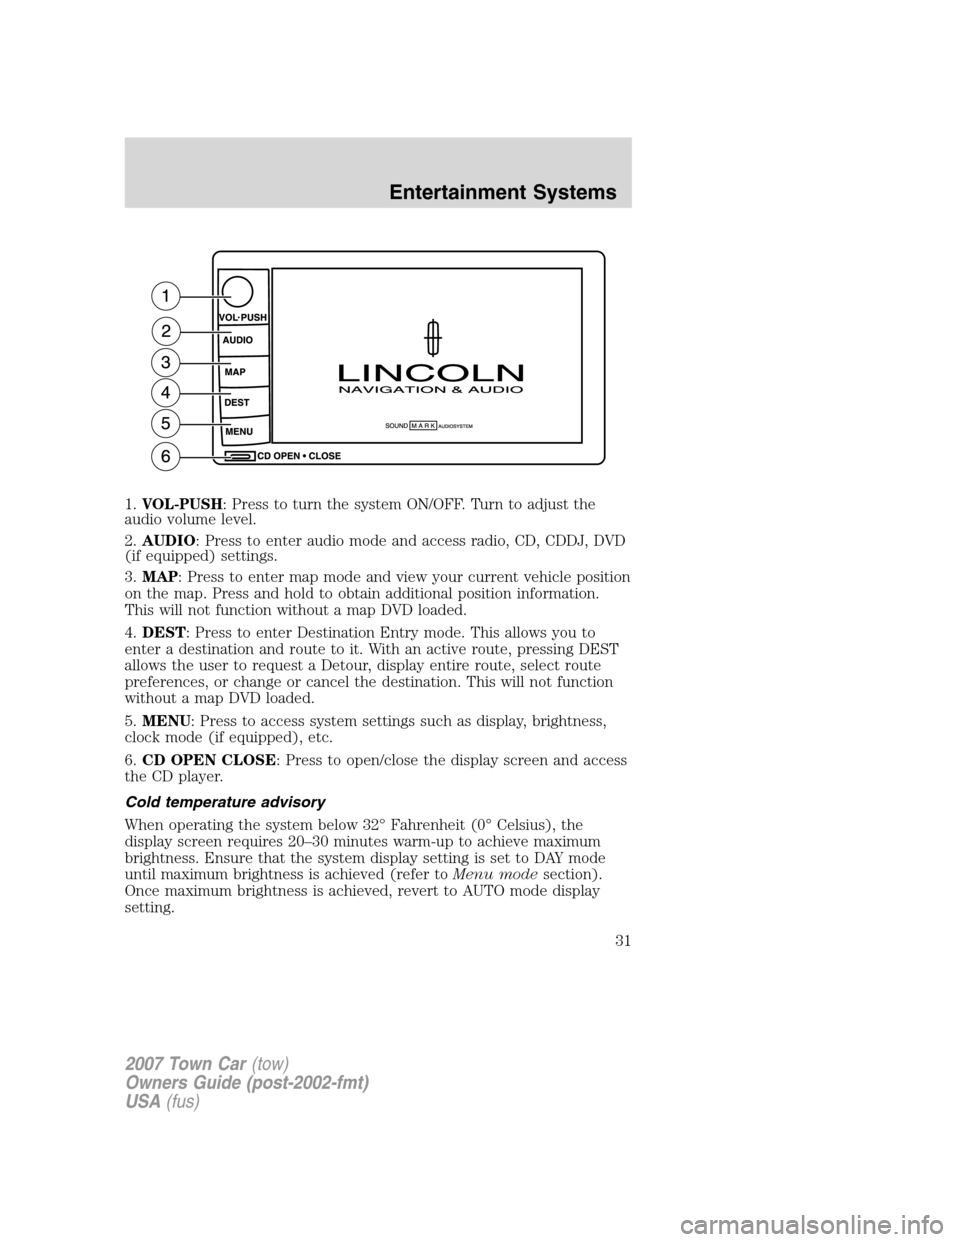 LINCOLN TOWN CAR 2007 Owners Guide 1.VOL-PUSH: Press to turn the system ON/OFF. Turn to adjust the
audio volume level.
2.AUDIO: Press to enter audio mode and access radio, CD, CDDJ, DVD
(if equipped) settings.
3.MAP: Press to enter map